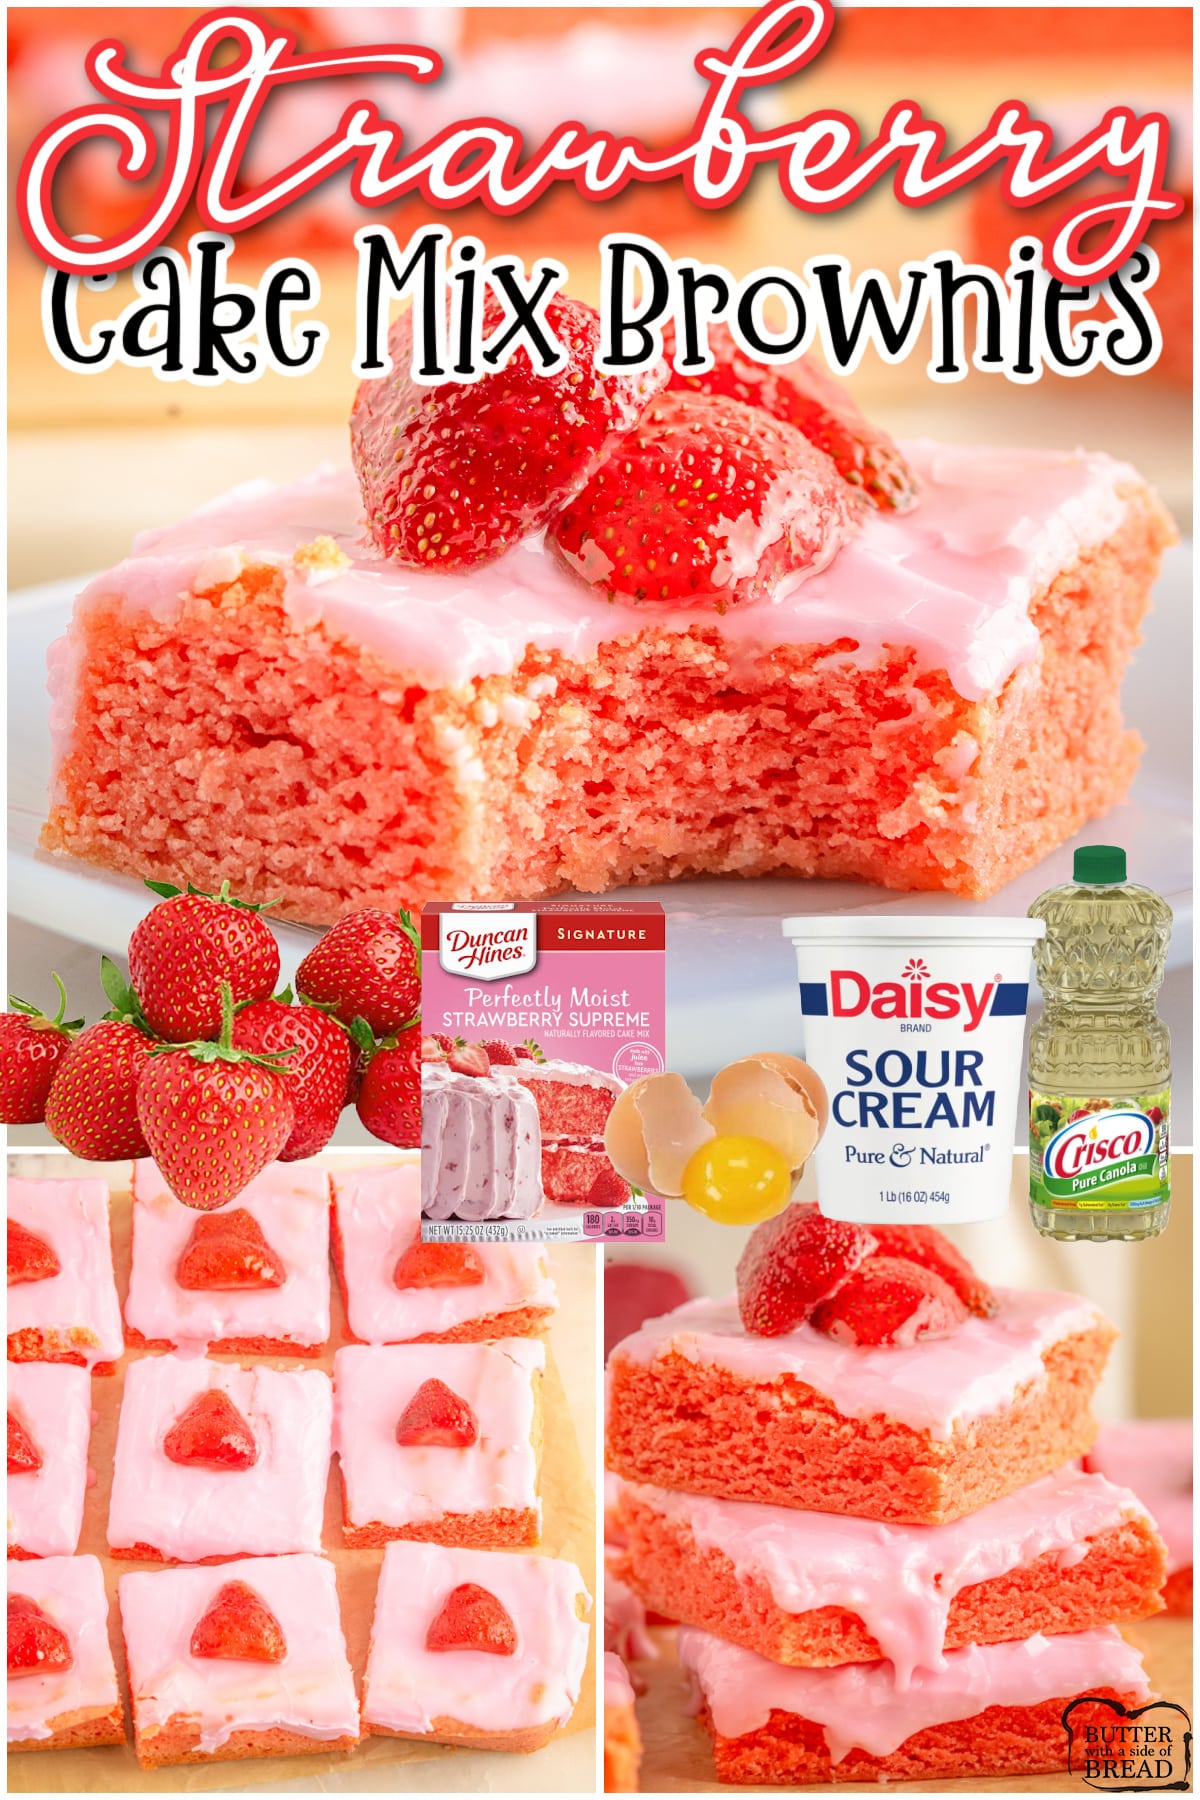 Cake Mix Strawberry Brownies made easy with a handful of simple ingredients! Fantastic strawberry flavor in these fudgy strawberry bars topped with berry icing!